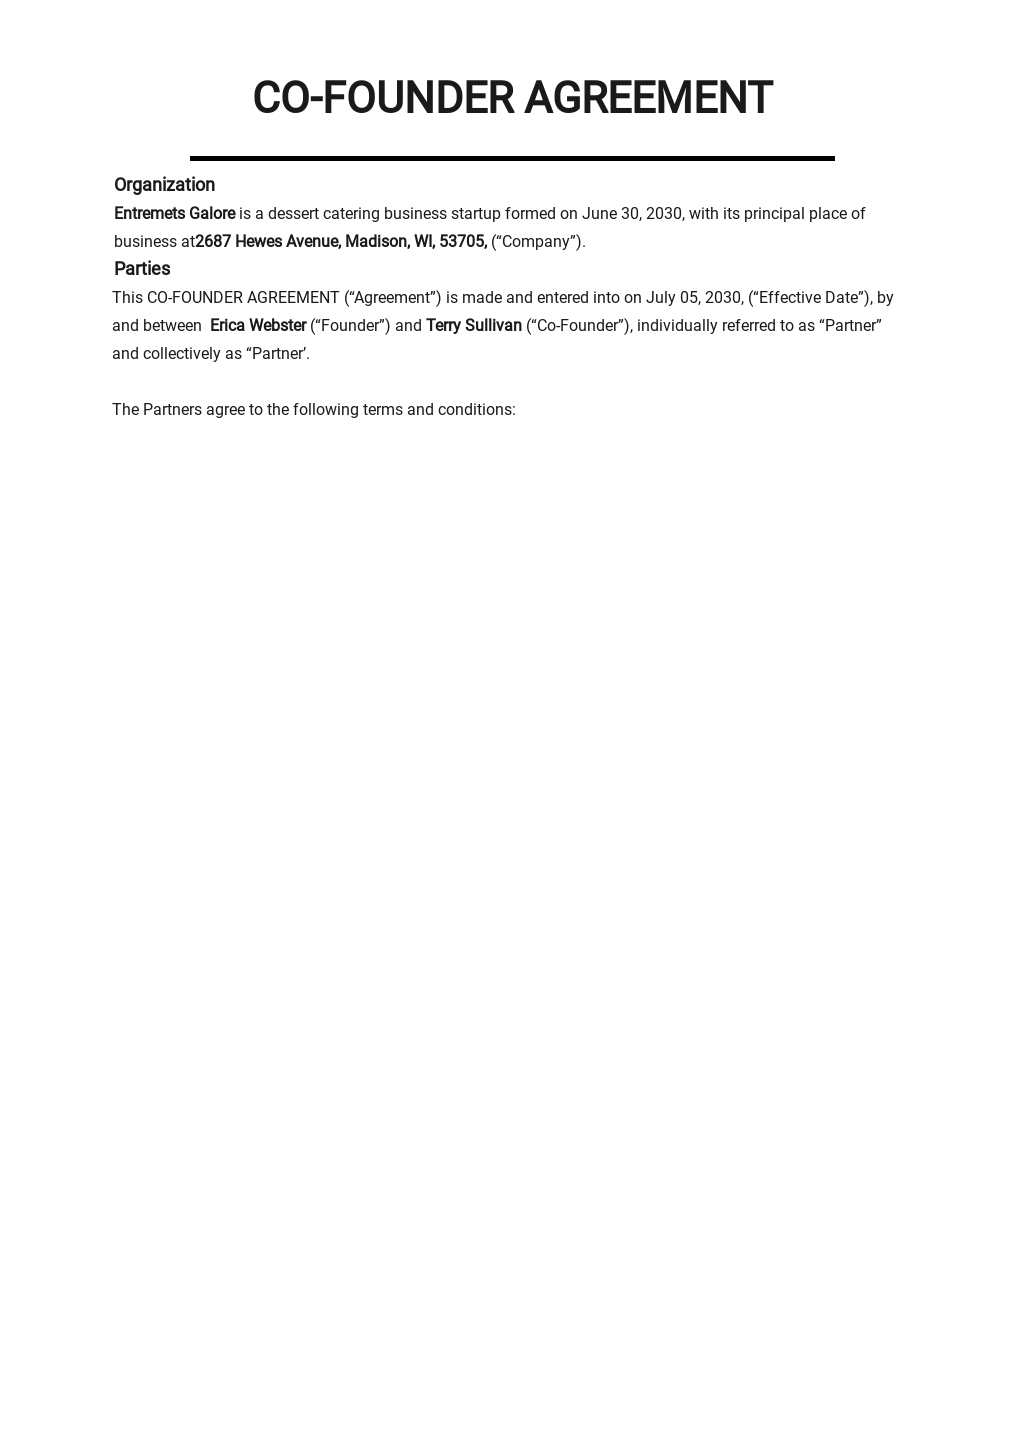 Co-Founder Agreement Startup Template - Word  Template.net With Regard To founders shareholder agreement template